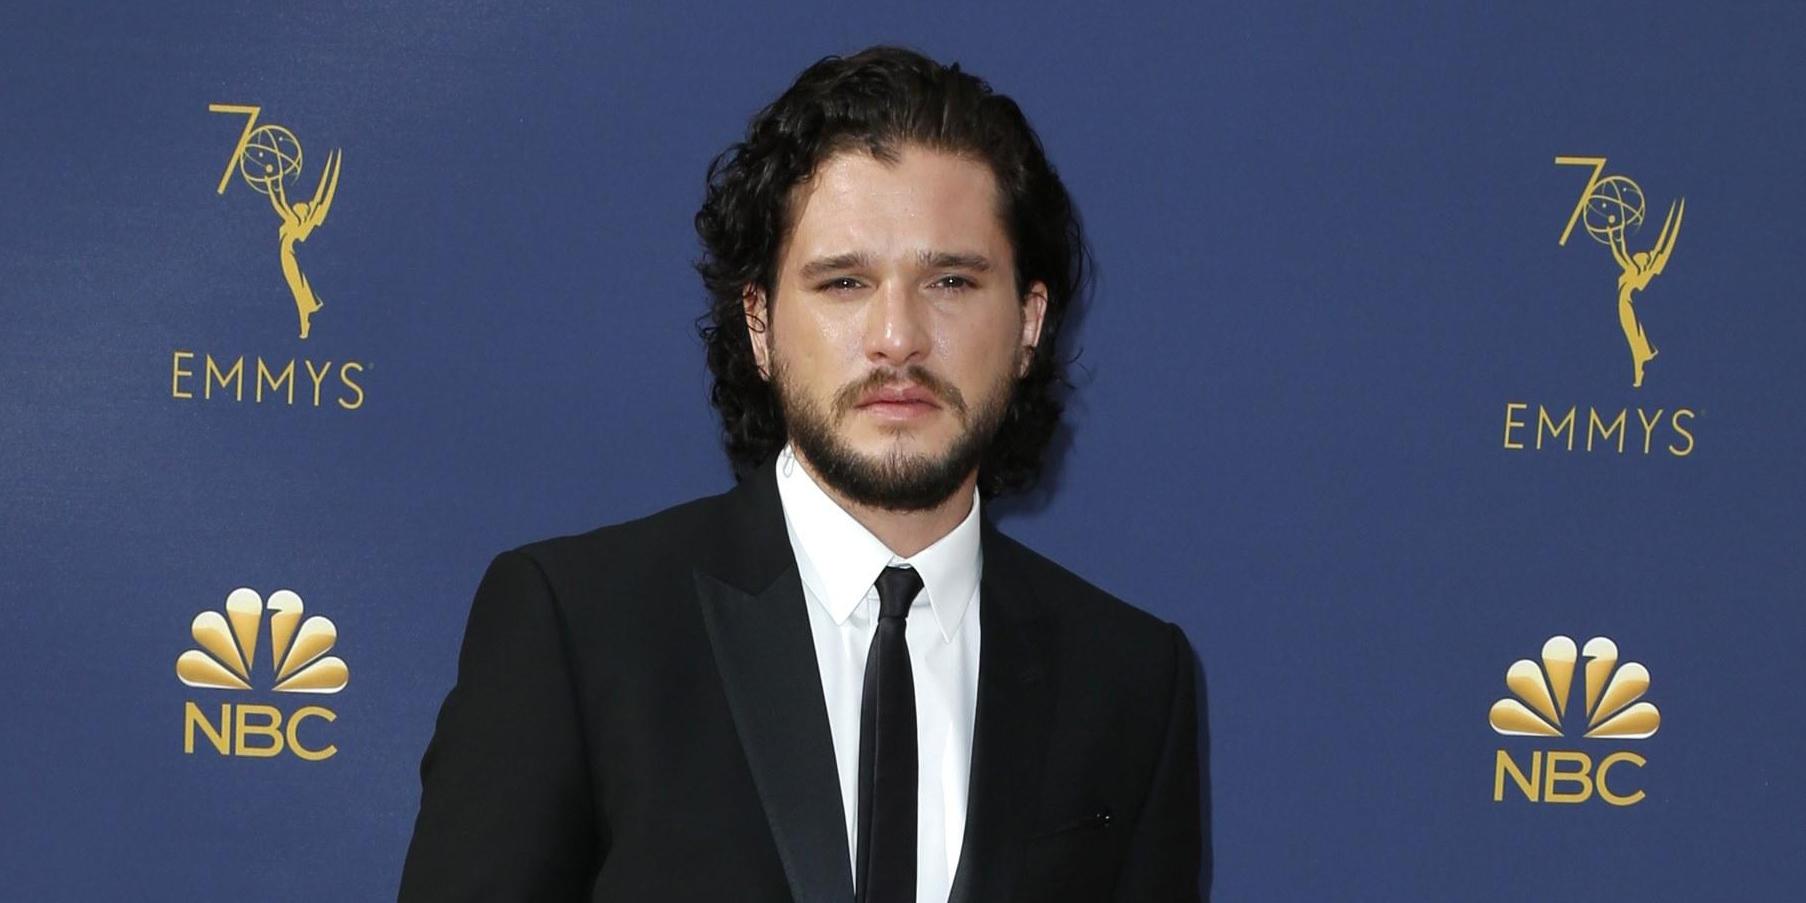 Jon Snow set to return in Game of Thrones sequel series – reports, Game of  Thrones